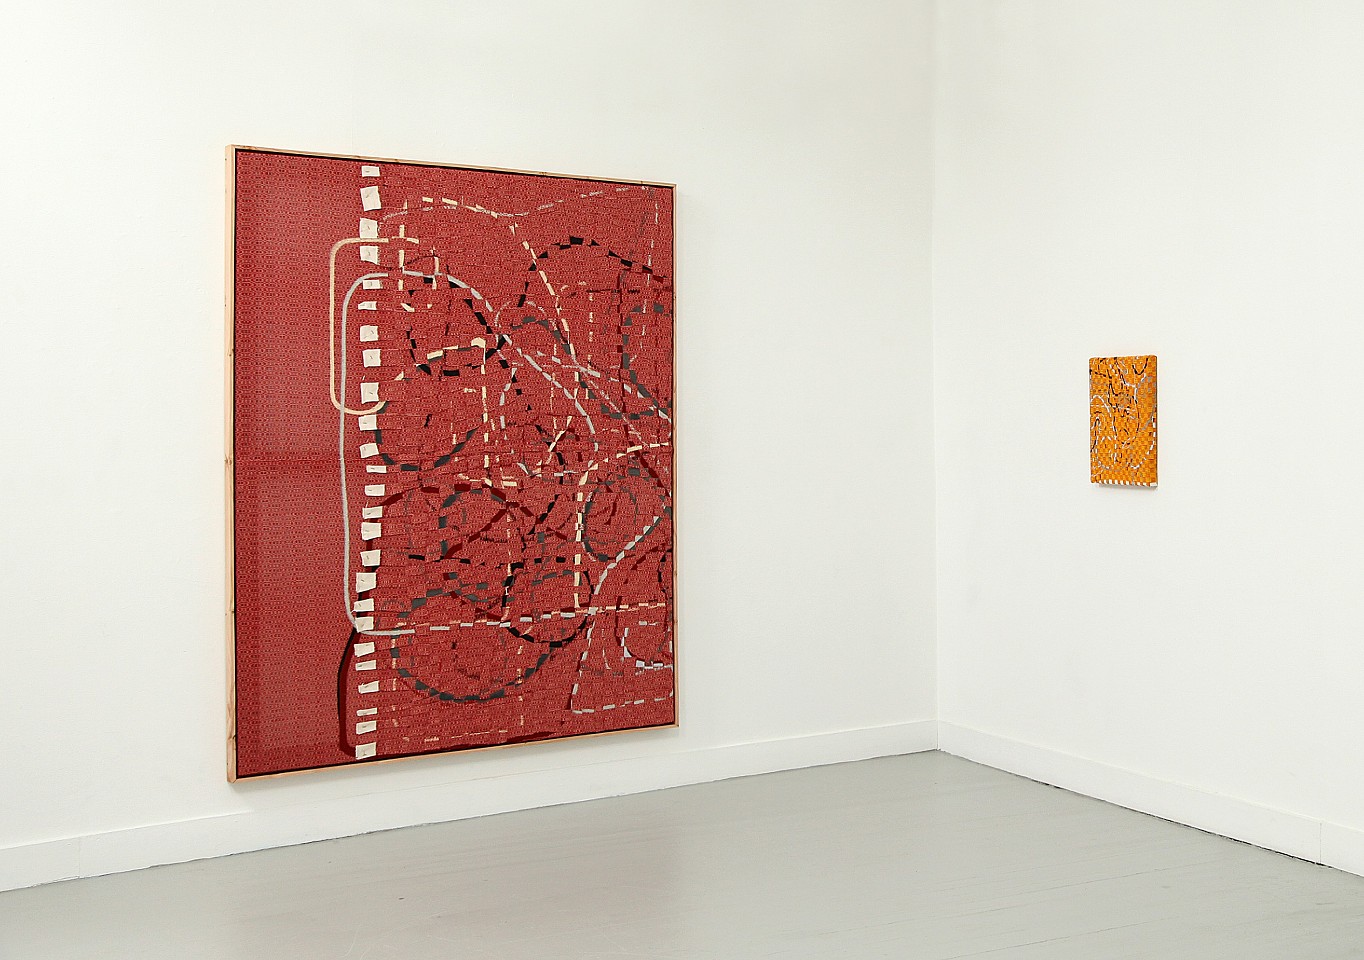 Gabriel Pionkowski
Regarding the Fold (Solo Show Installation Photo), 2014
deconstructed, hand-painted, woven, cut, folded & plaited canvas, red fir, acrylic.t-pins, artists frame, 87 x 70 in.